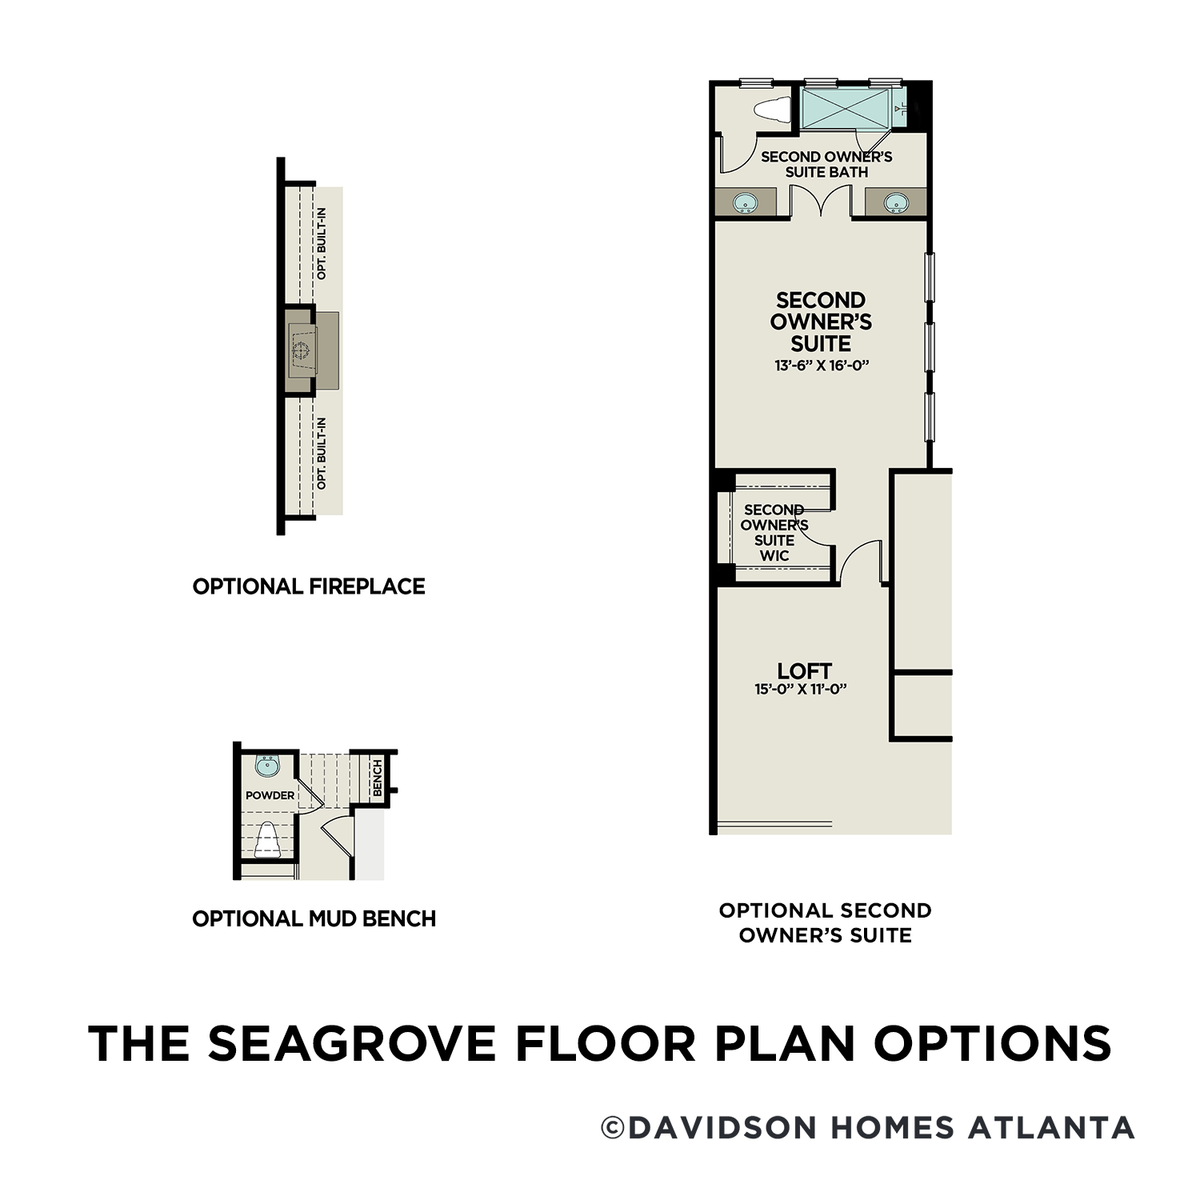 3 - The Seagrove B floor plan layout for 648 Stickley Oak Way in Davidson Homes' The Village at Towne Lake community.